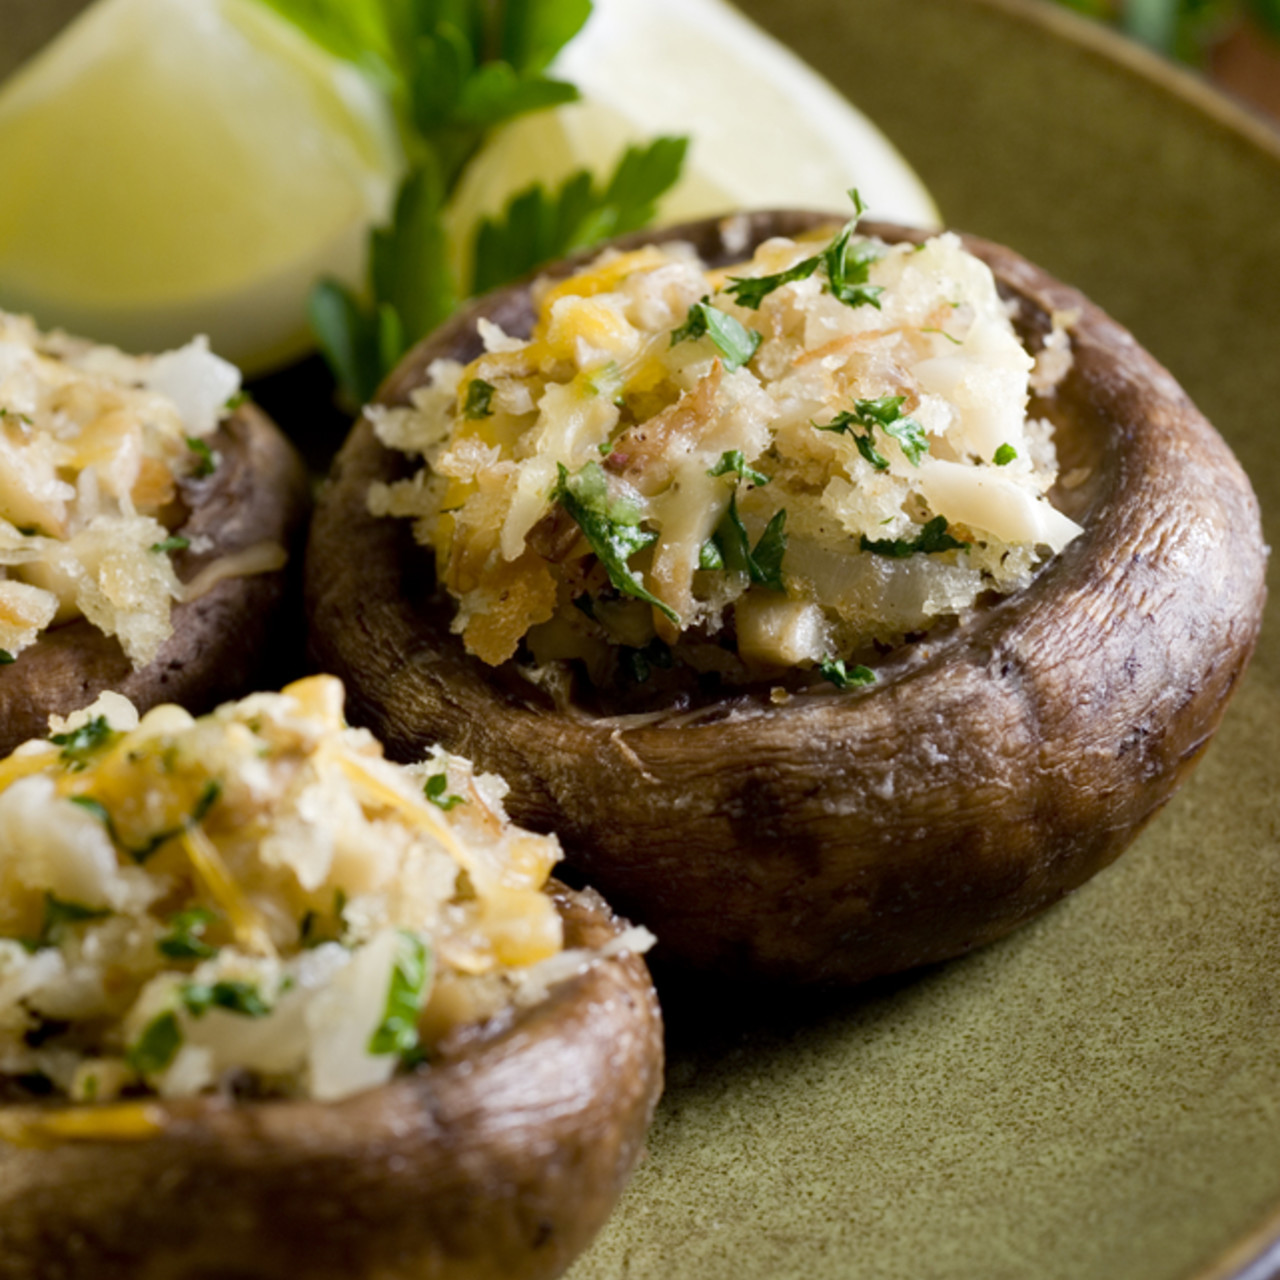 Ways How To Make Perfect Large Stuffed Mushrooms Easy Recipes To